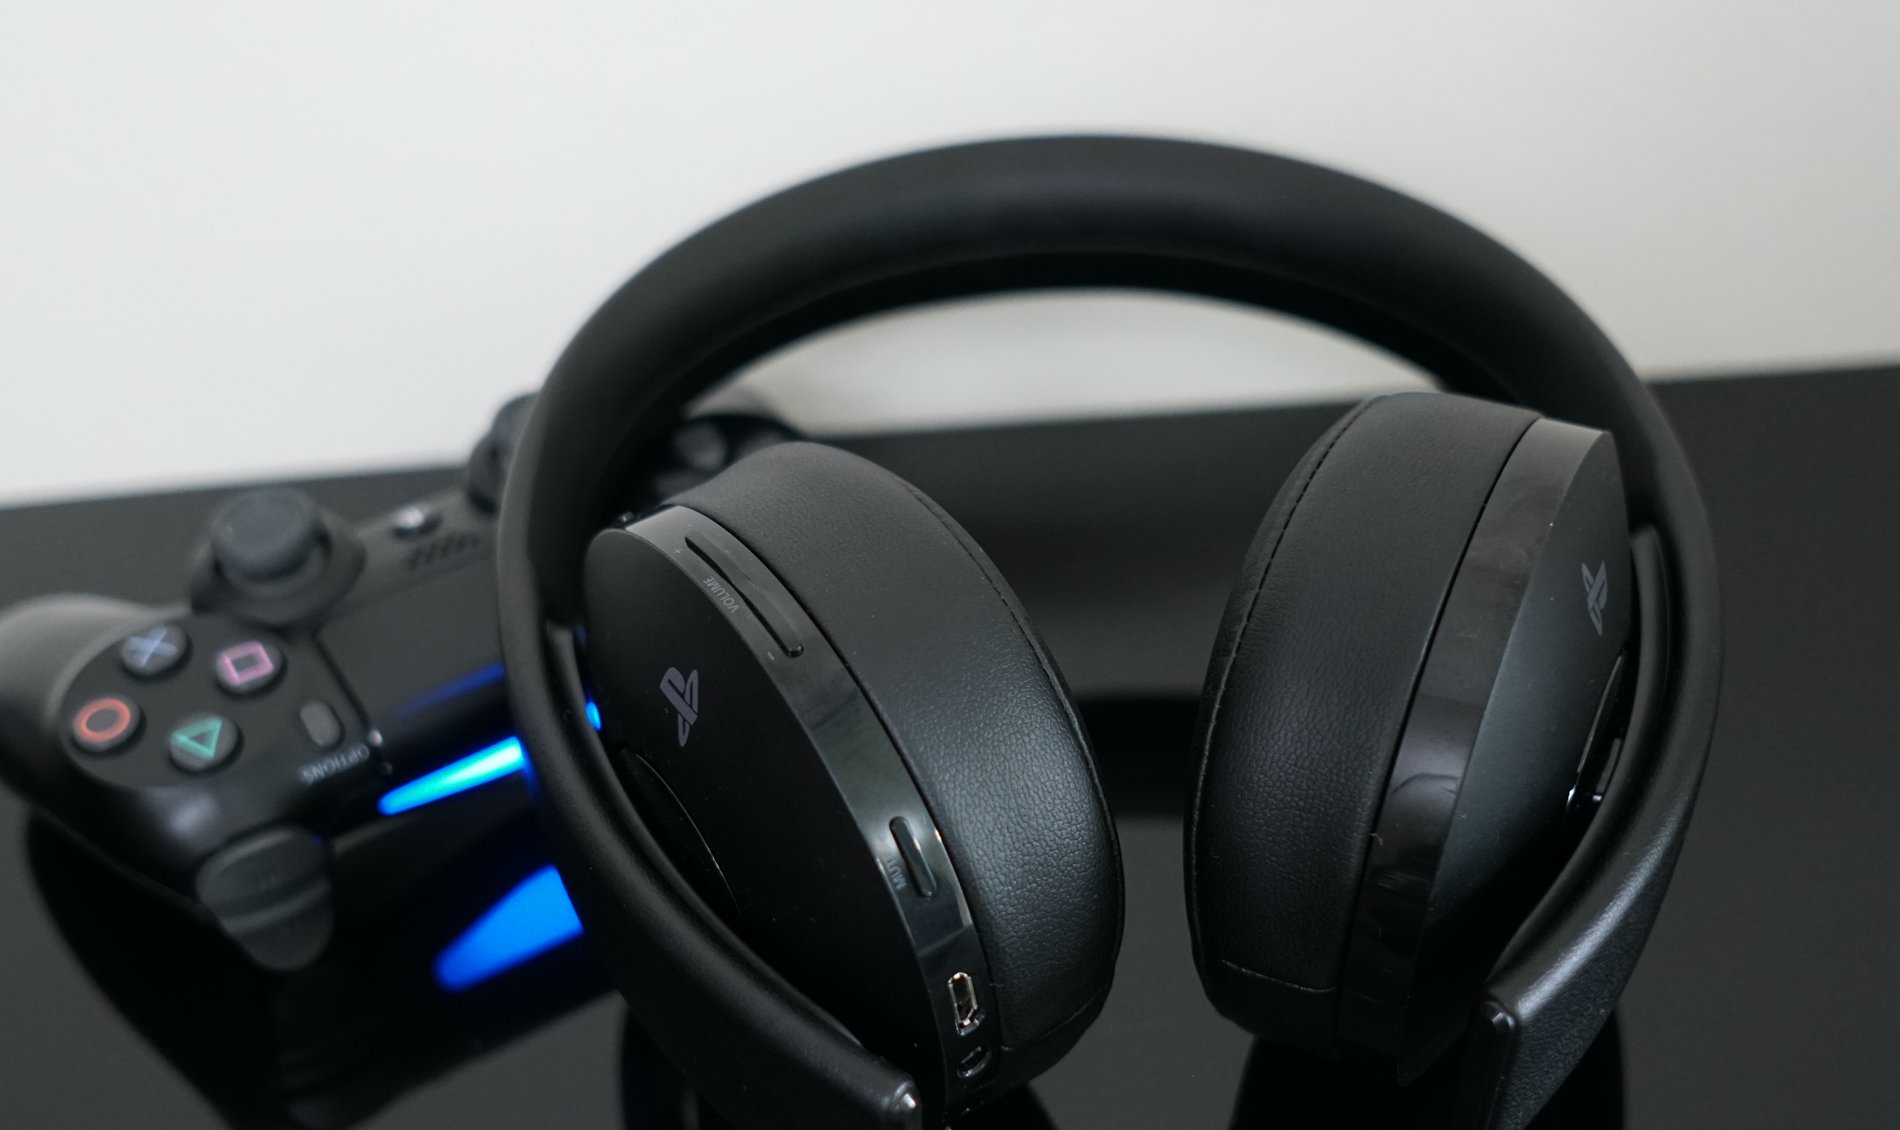 How to Connect Bluetooth Headphones to Ps4 